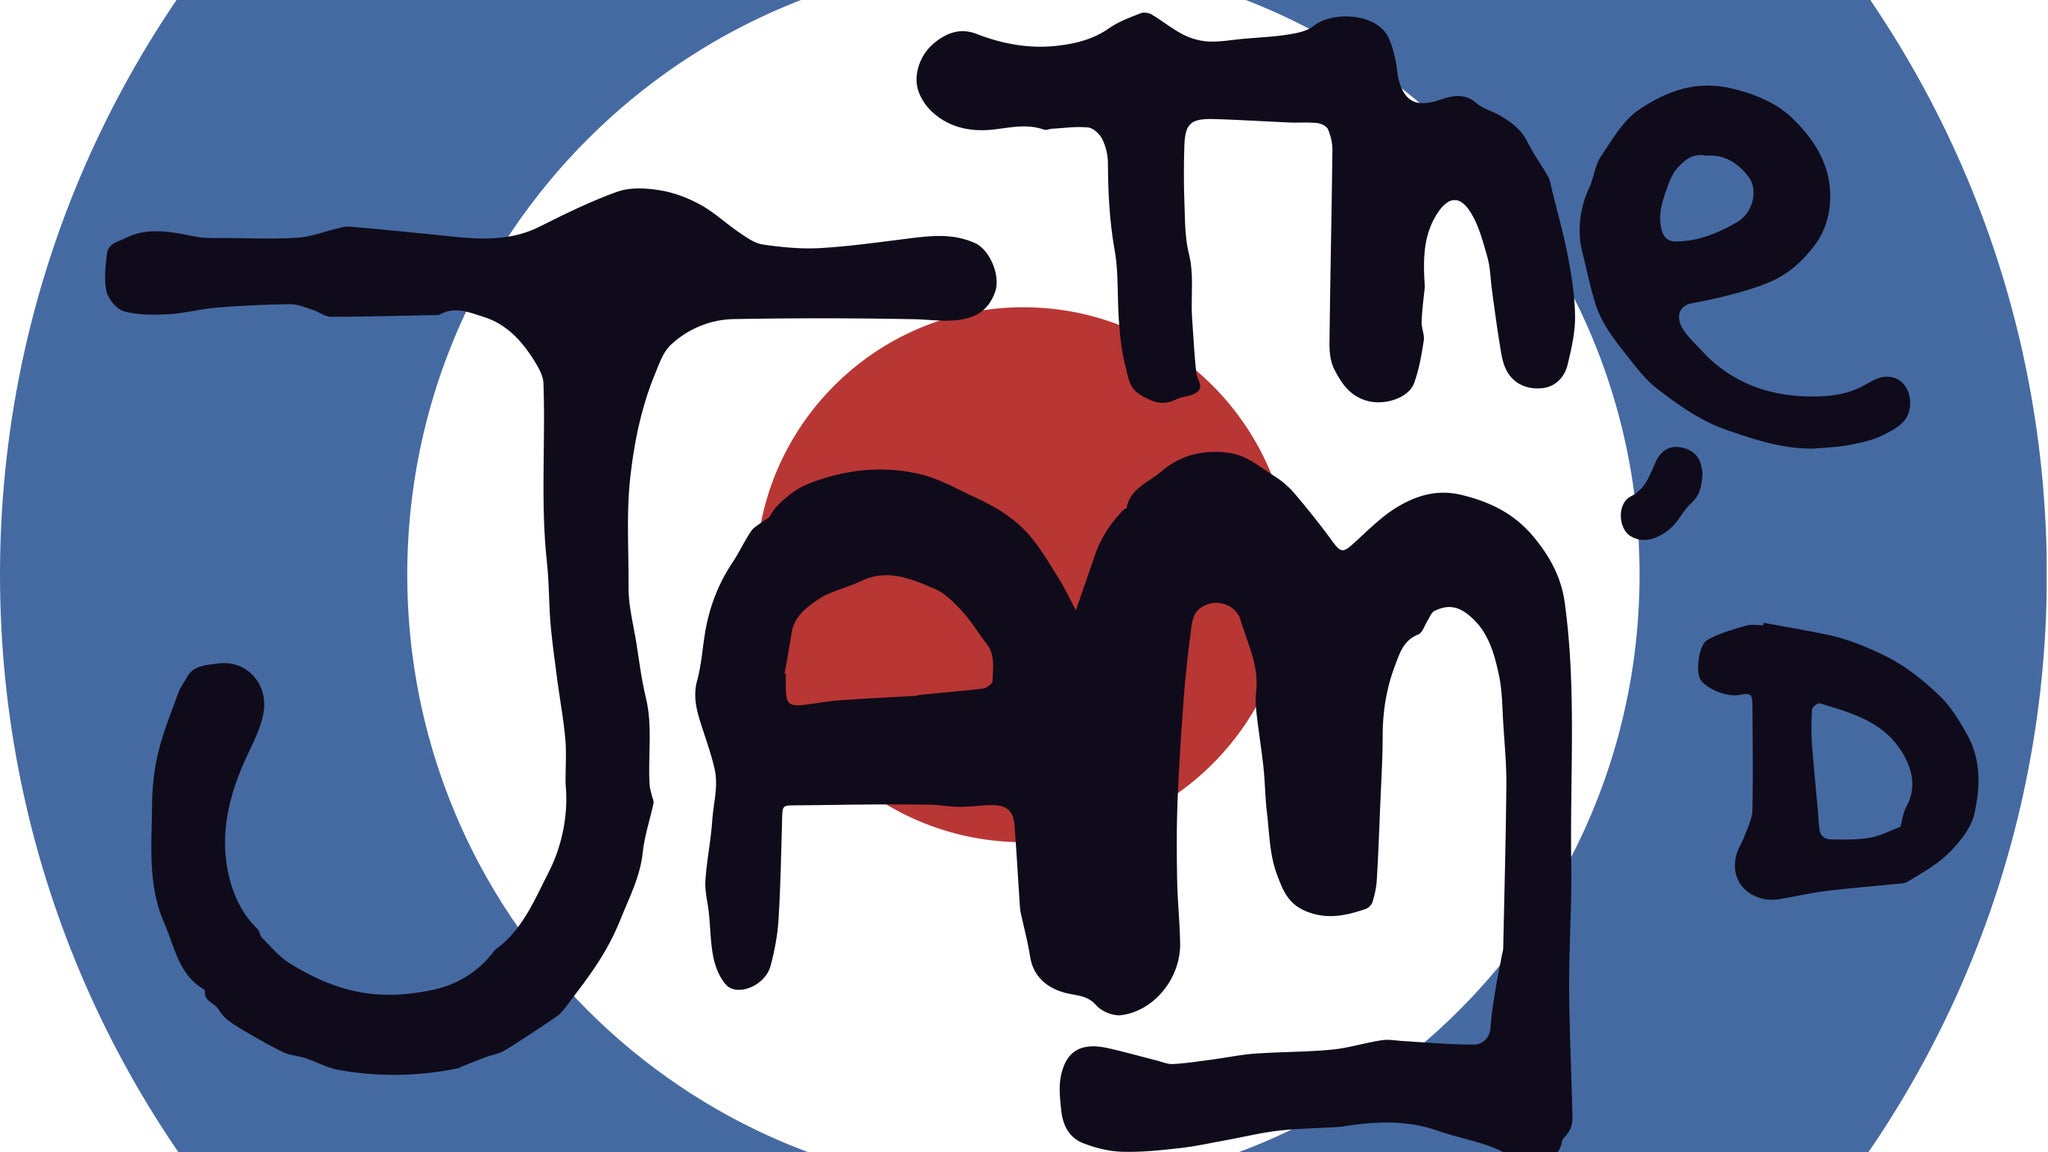 The Jam'd Event Title Pic